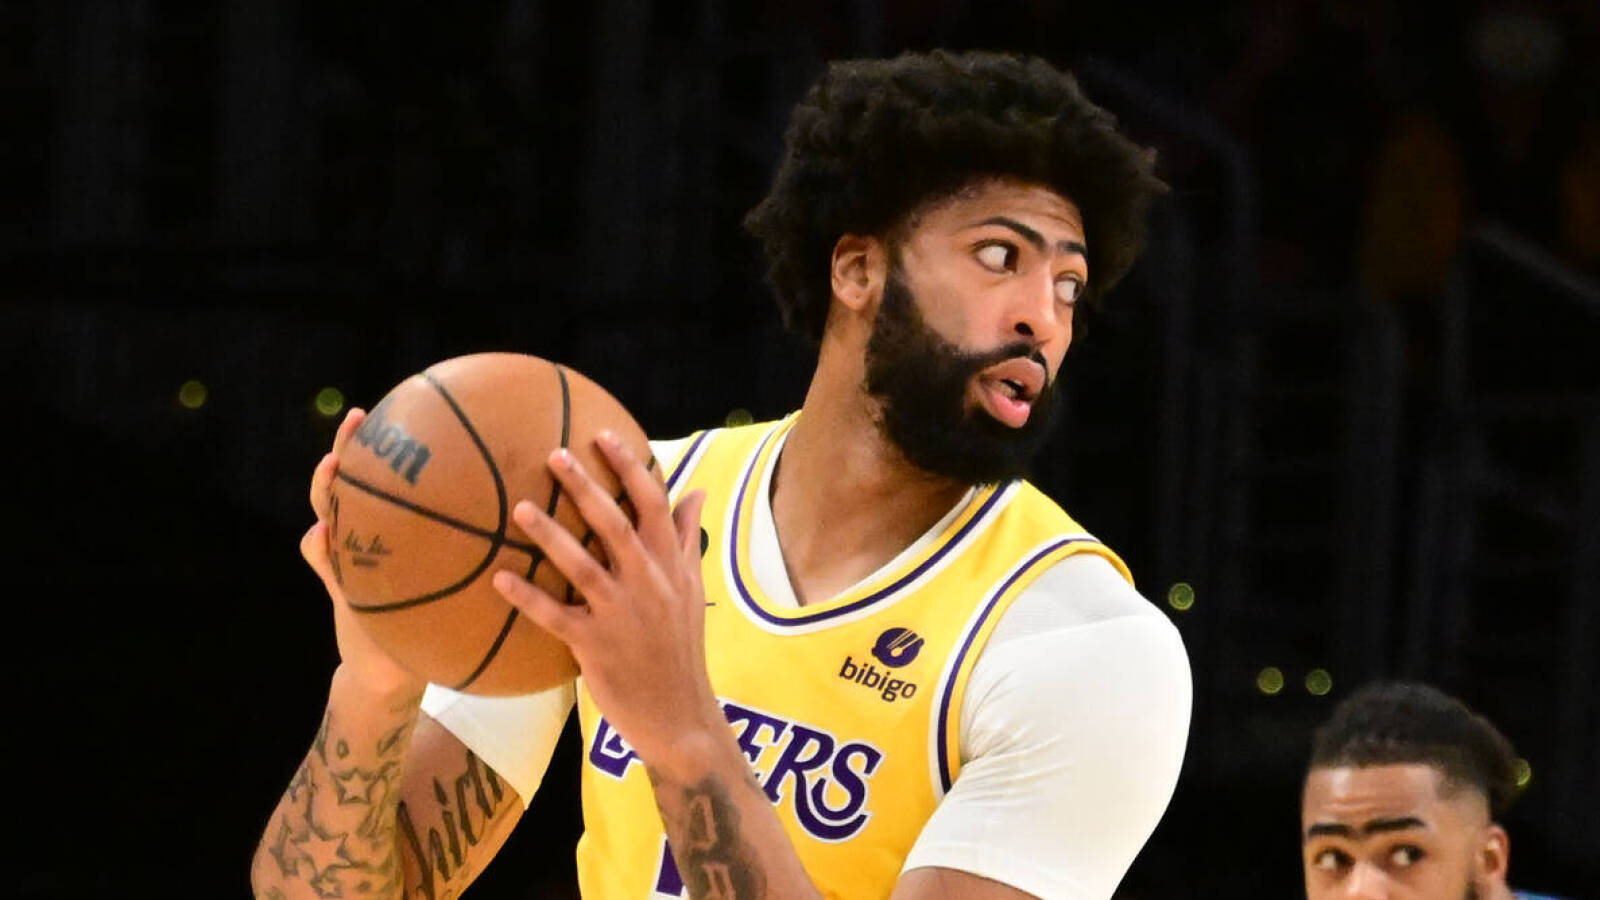 Lakers' Anthony Davis on starting at center: 'I trust coach's decision'